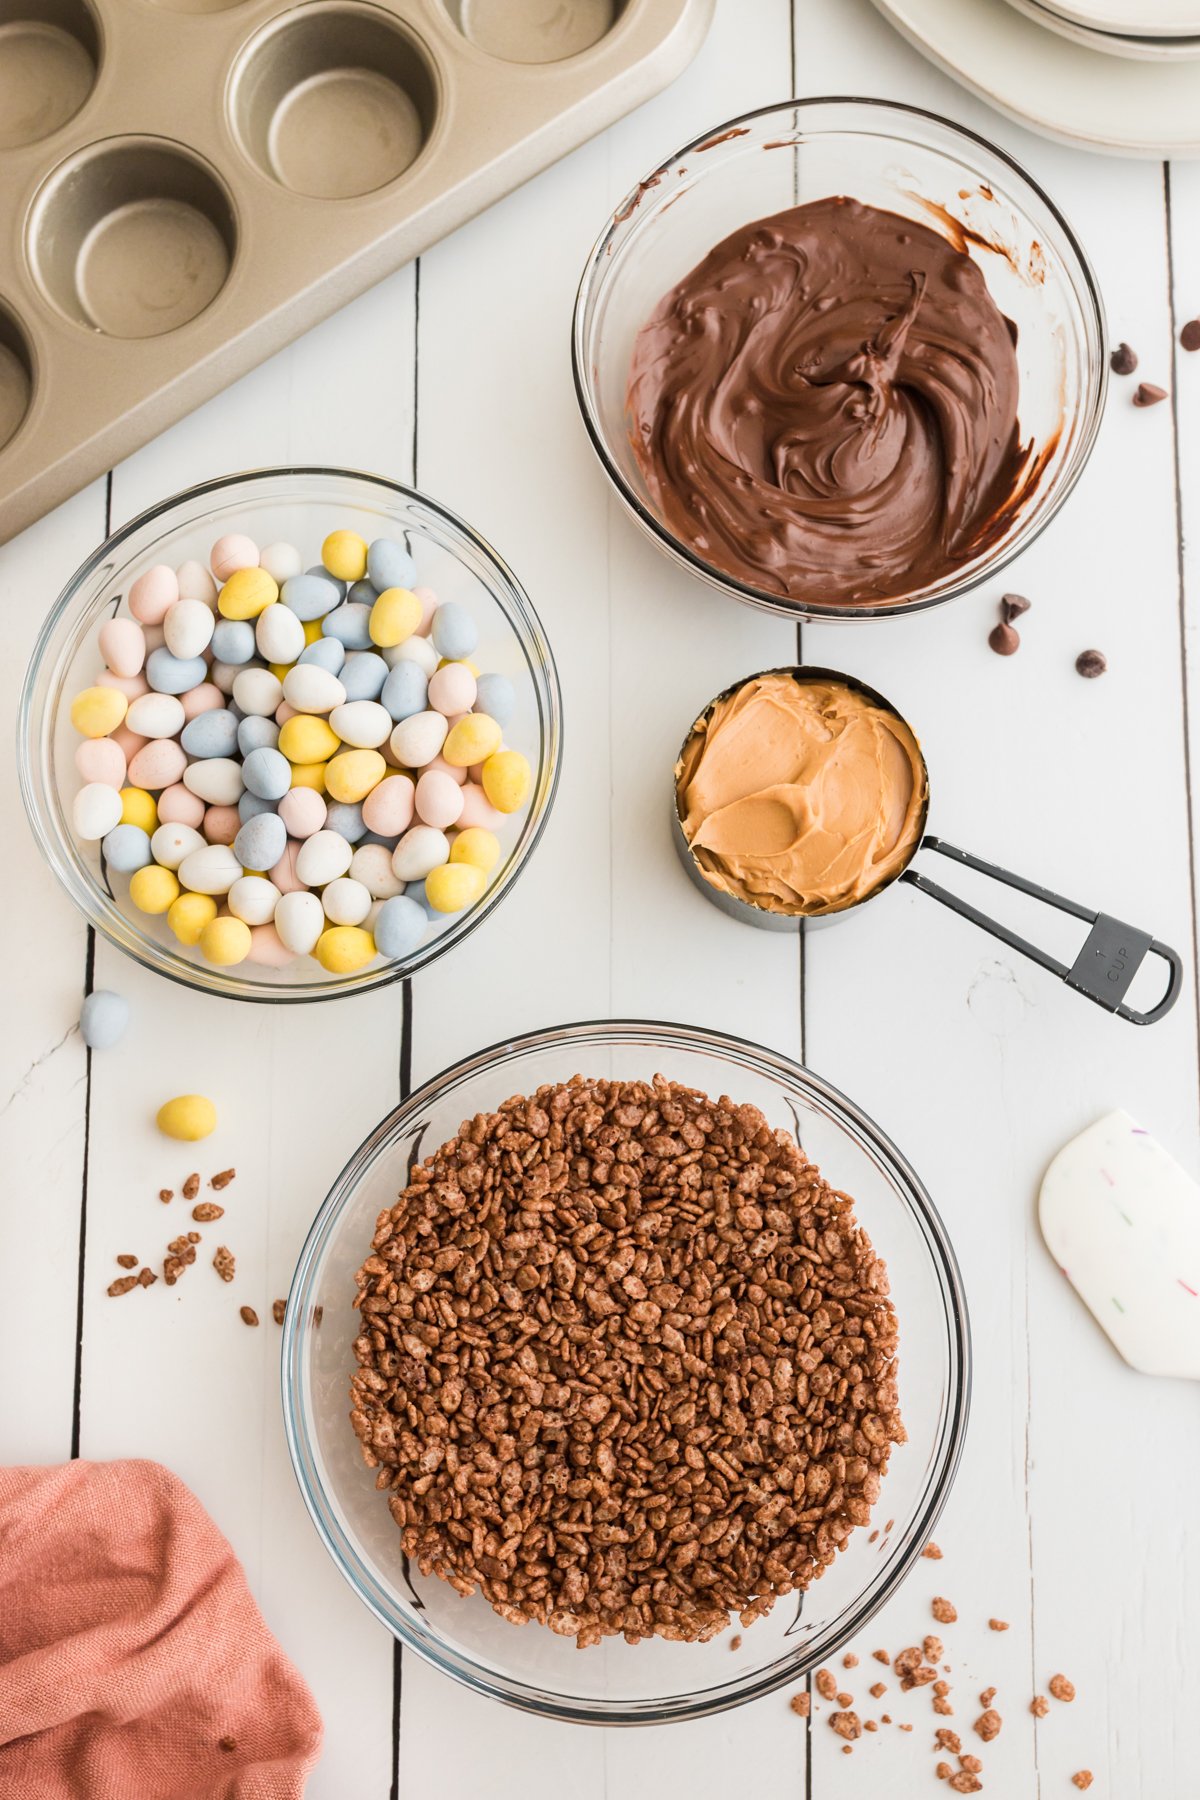 Bowls with Cocoa Rice krispies and melted chocolate